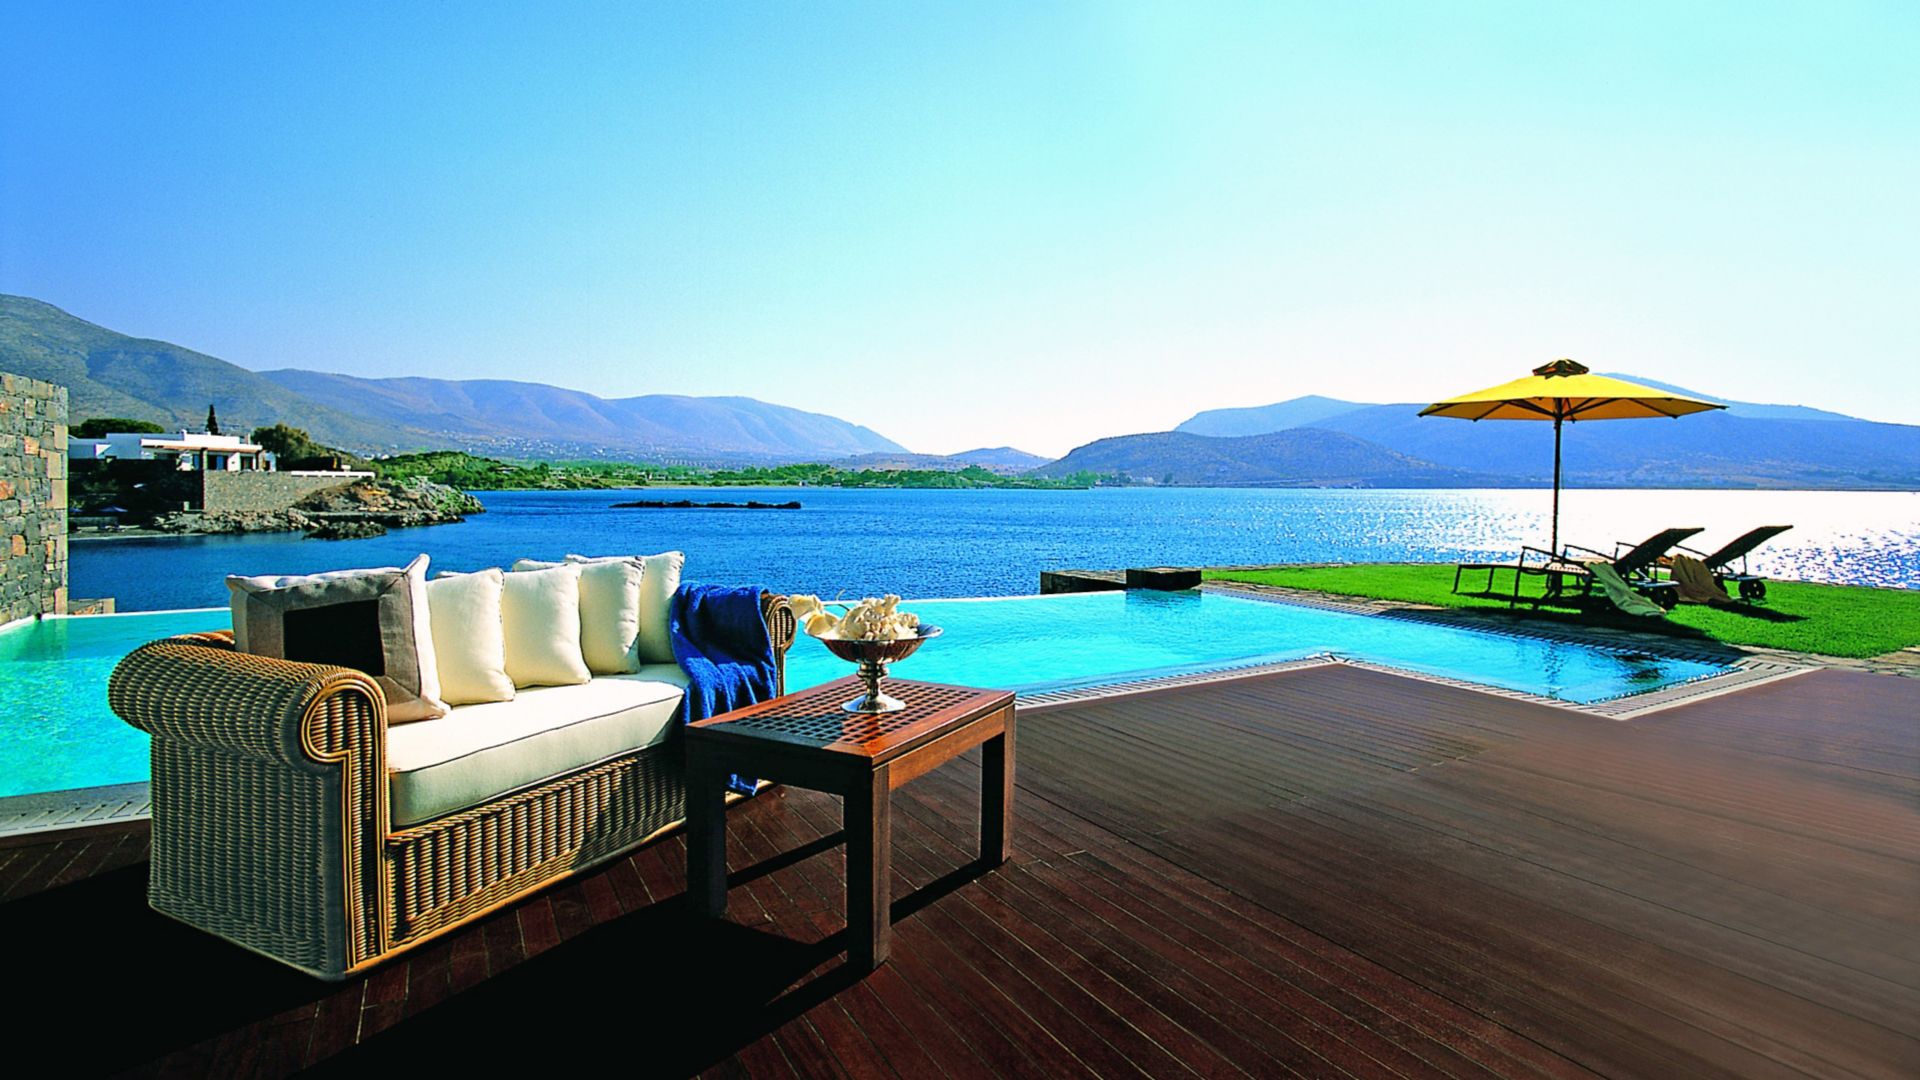 Wood floor installed by an infinity swimming pool	